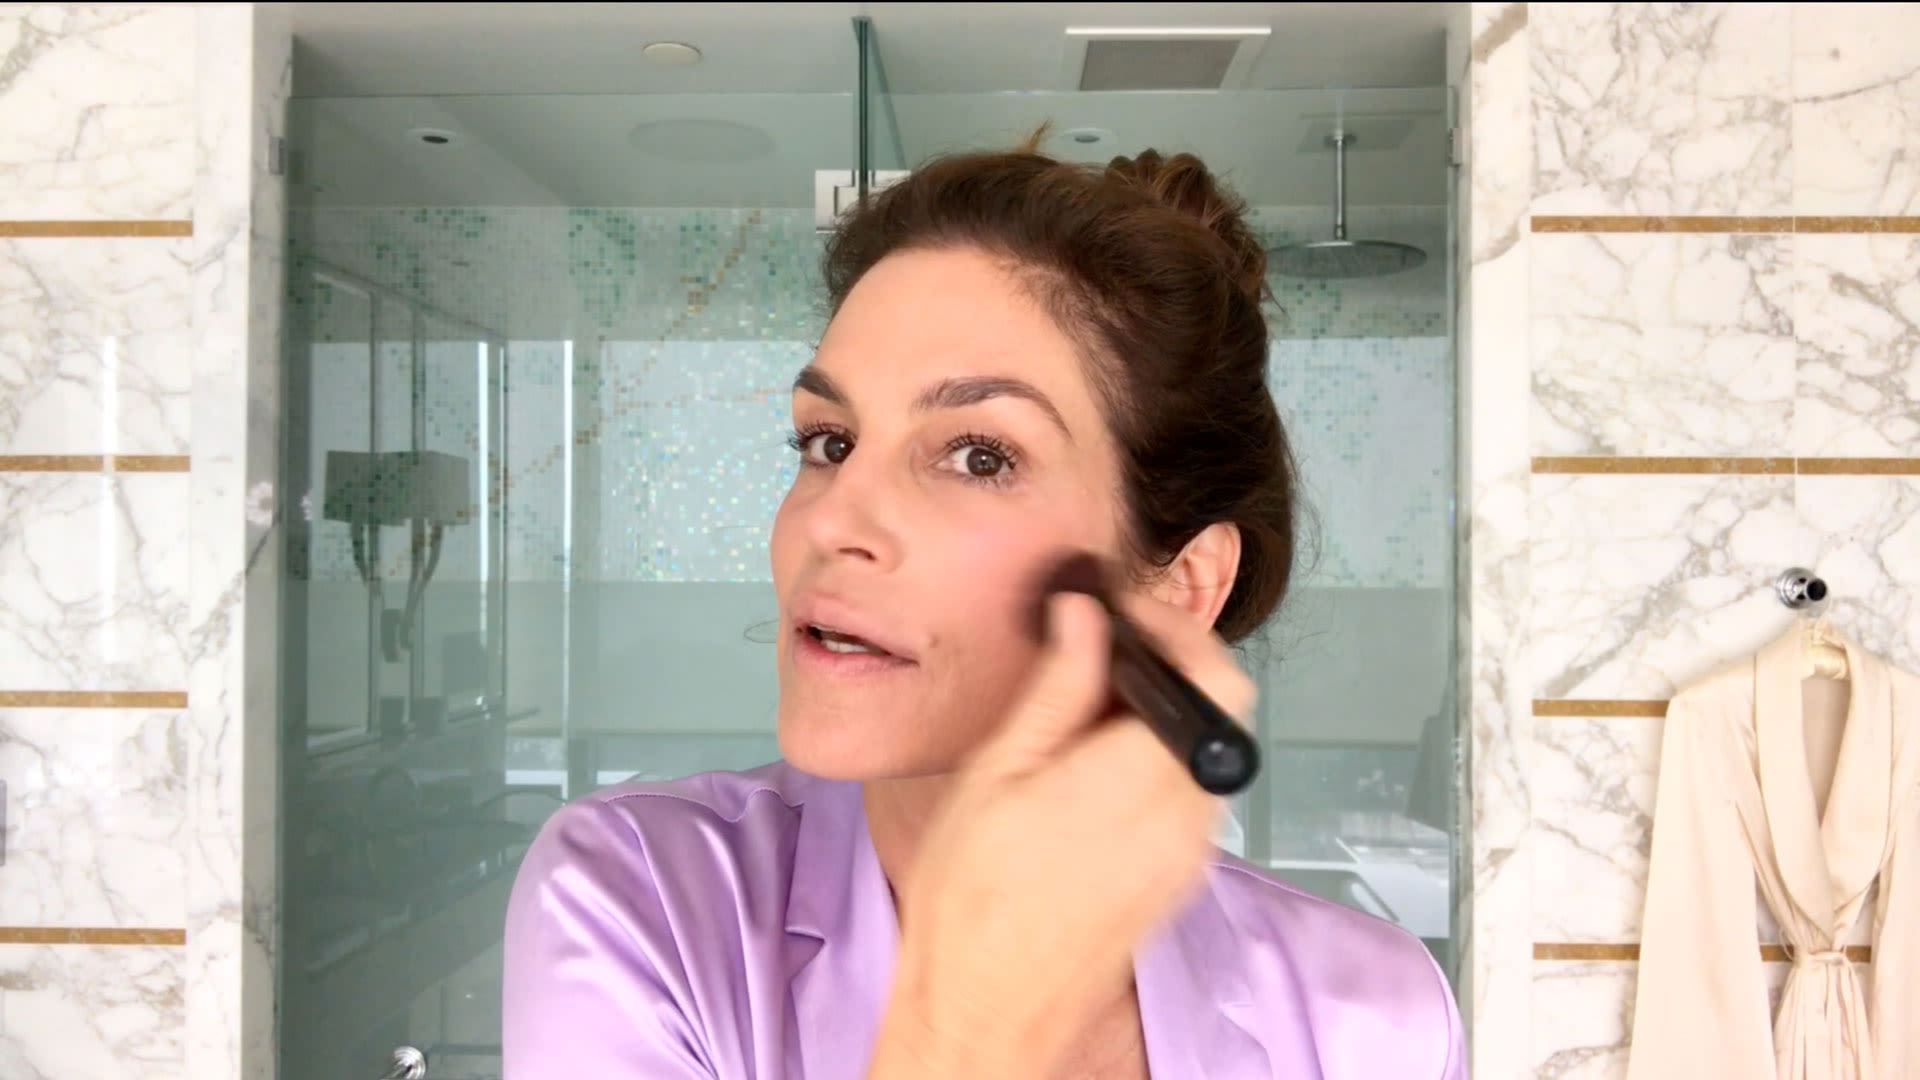 Watch Beauty Secrets Watch Cindy Crawford Do Her Getting Out The Door Morning Beauty Routine Vogue Video Cne Vogue Com Vogue